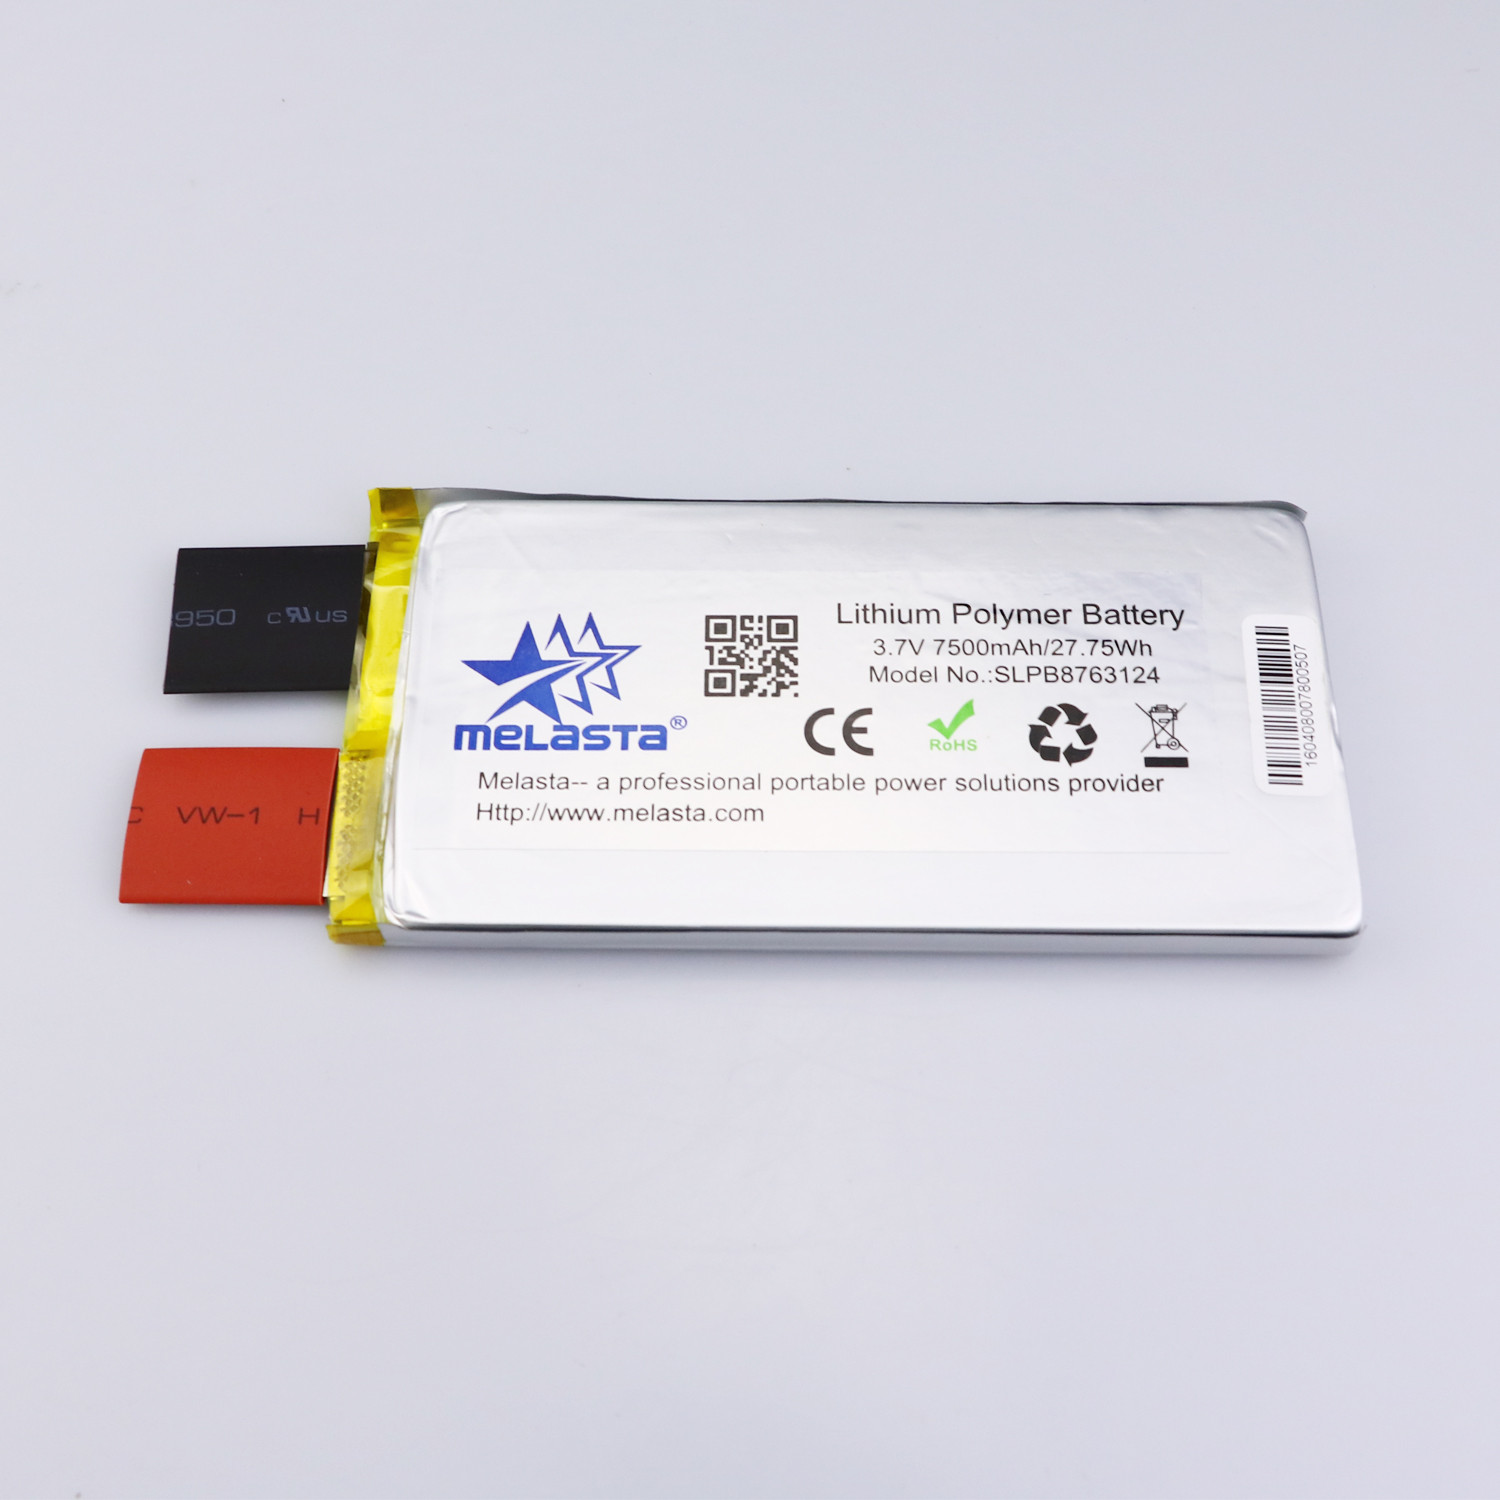 3.7V 7500mAh (27.75Wh) 15C super high capacity lithium ion polymer battery